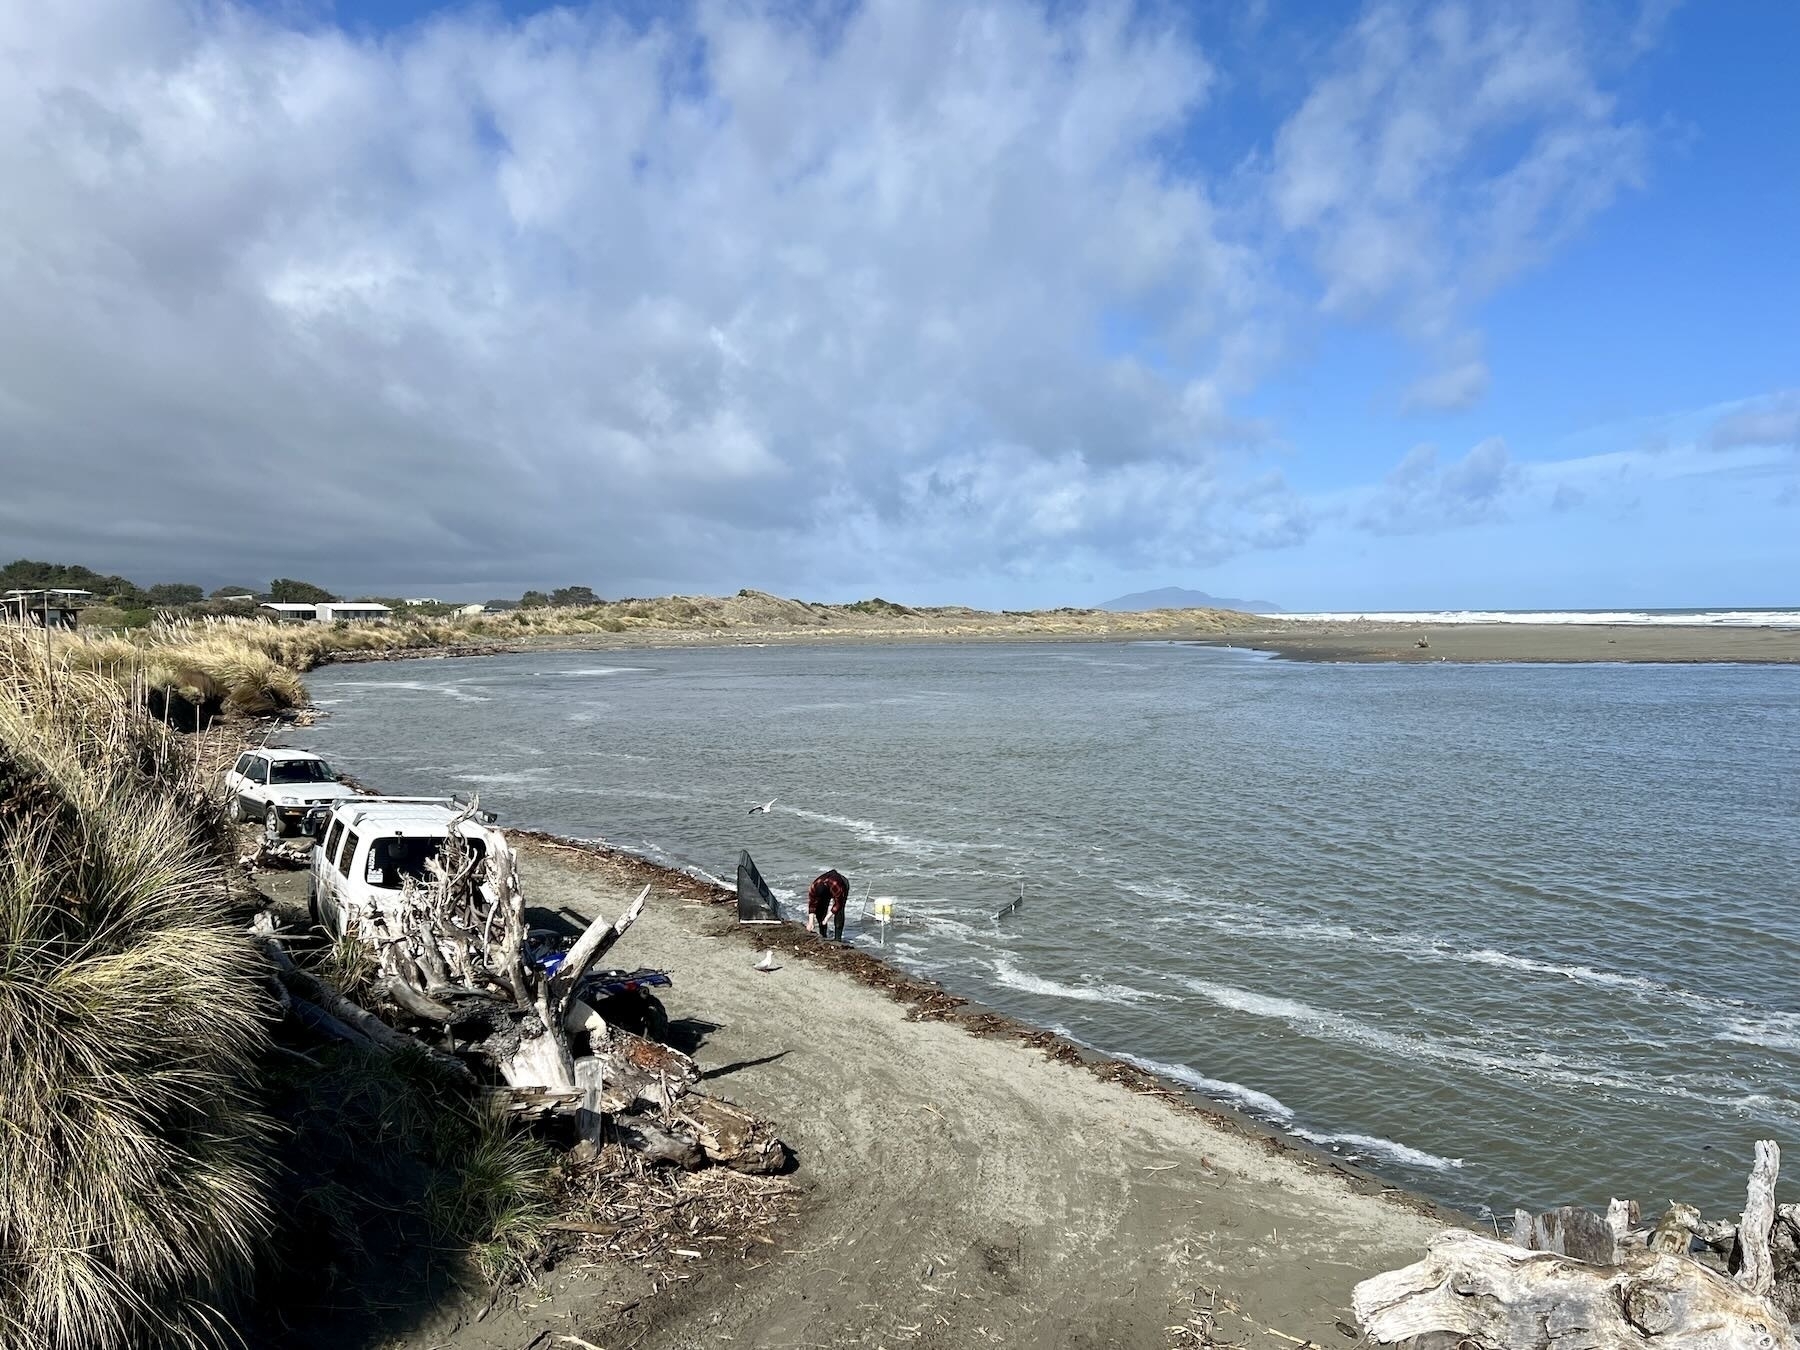 Several vehicles parked on a narrow strip of sand by the river mouth; one person standing in the water catching whitebait. 